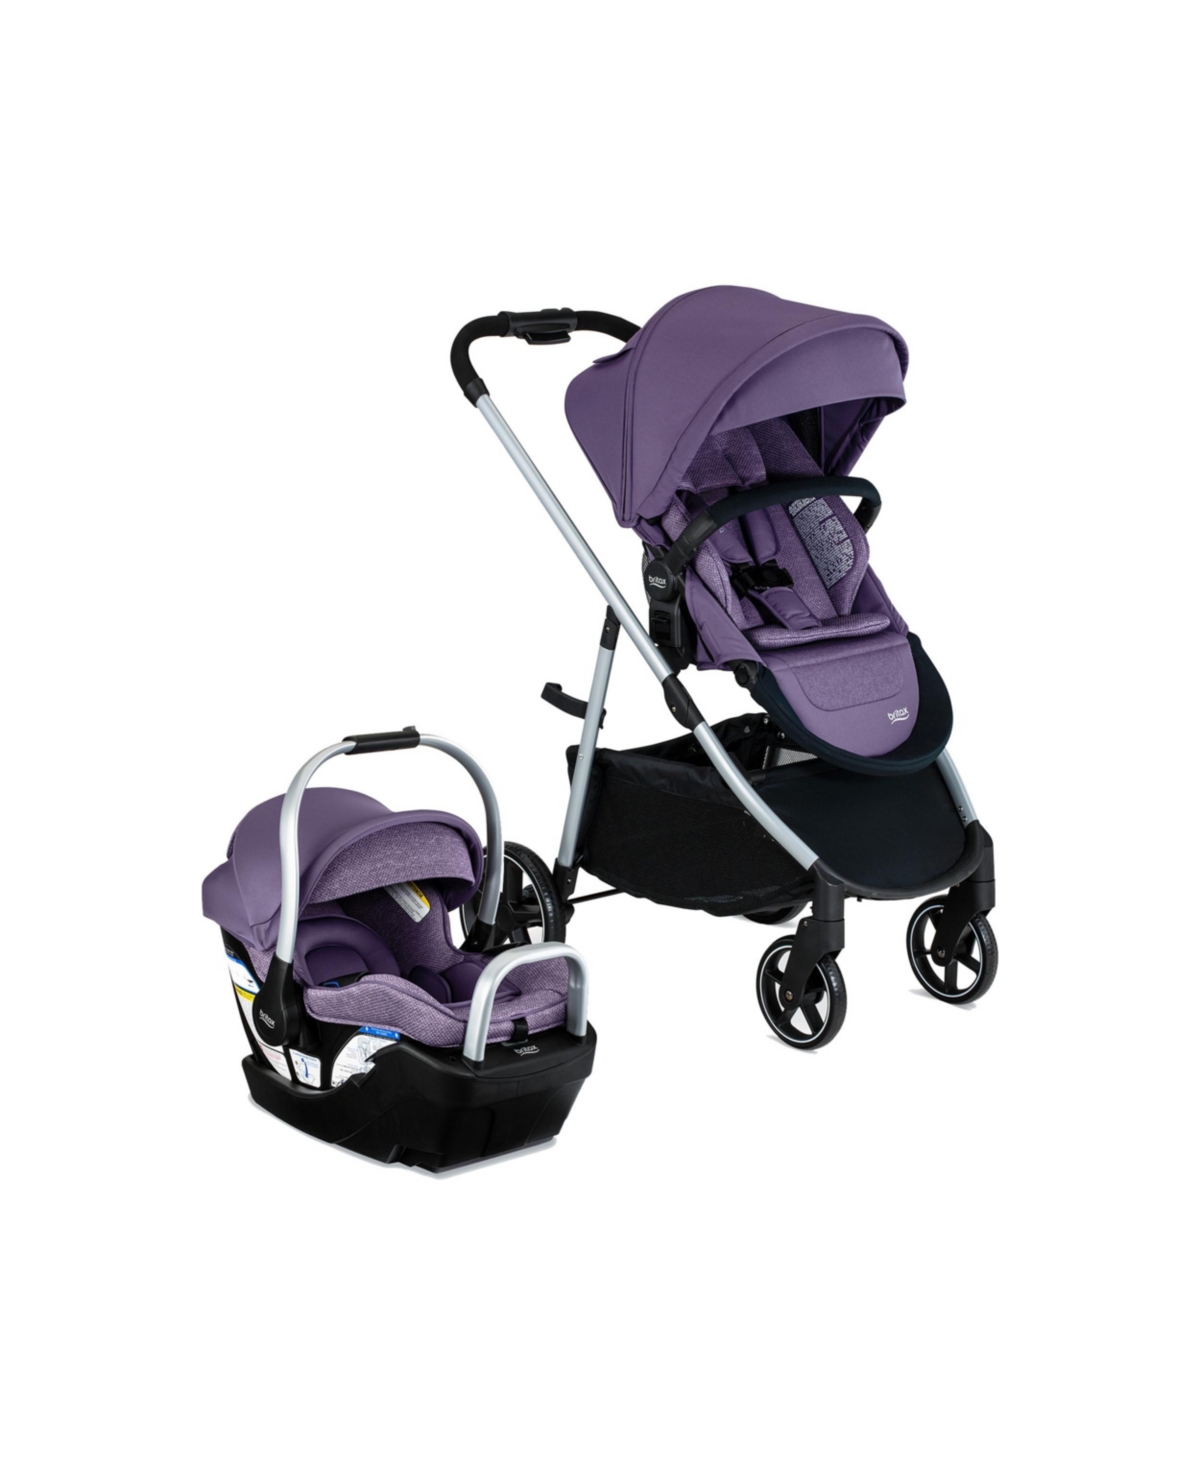 Britax Babies' Willow Grove Sc Travel System In Purple